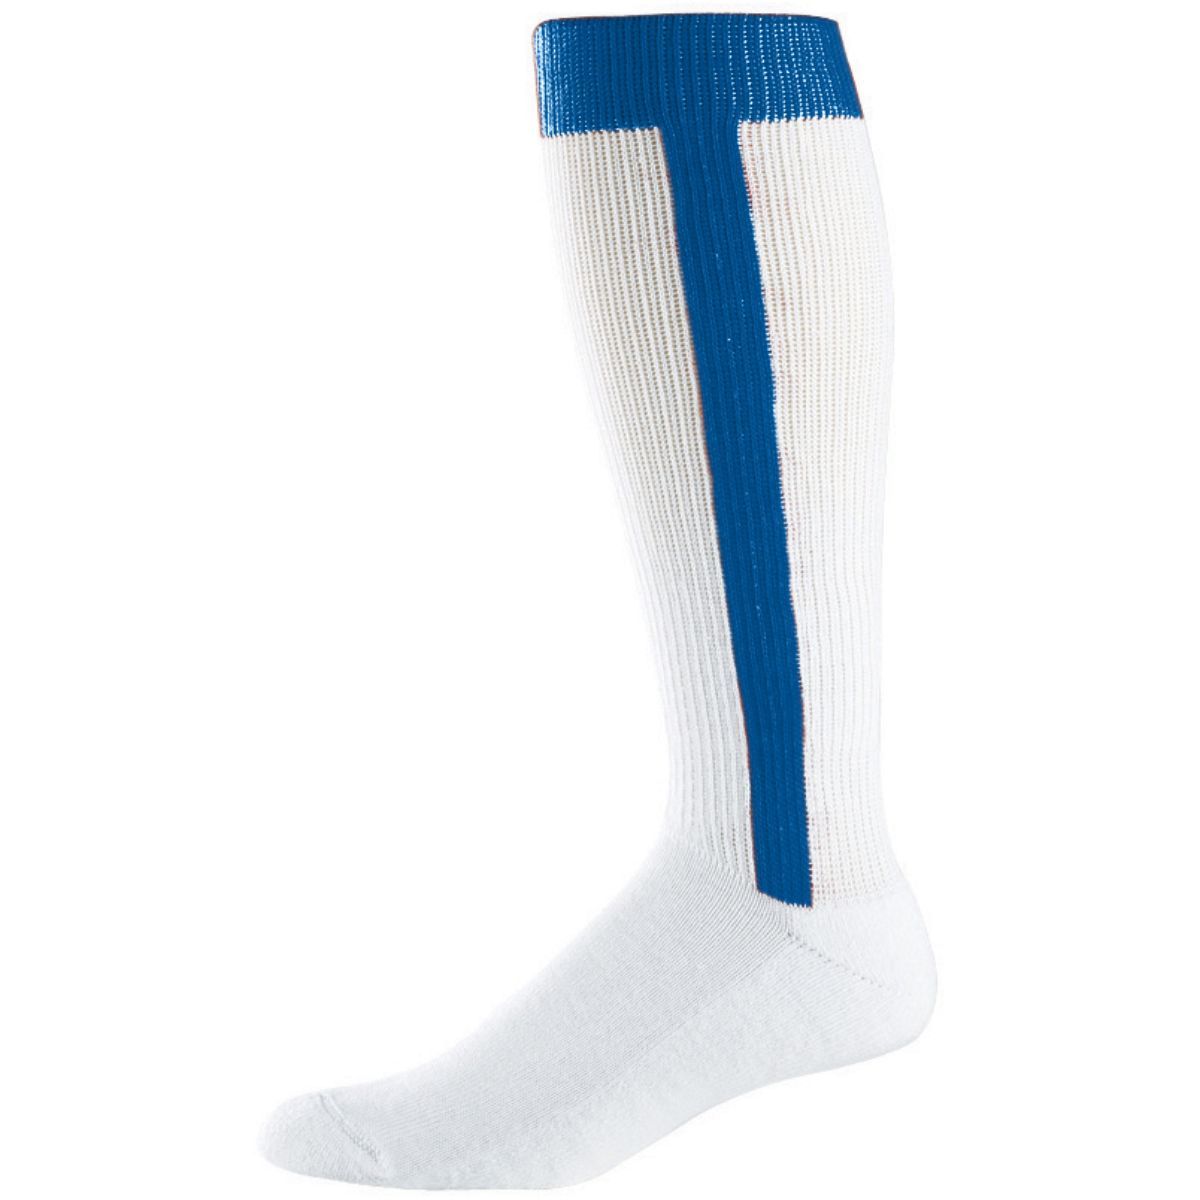 Augusta Sportswear Baseball Stirrup Sock in Royal  -Part of the Accessories, Augusta-Products, Accessories-Socks, Baseball, All-Sports, All-Sports-1 product lines at KanaleyCreations.com